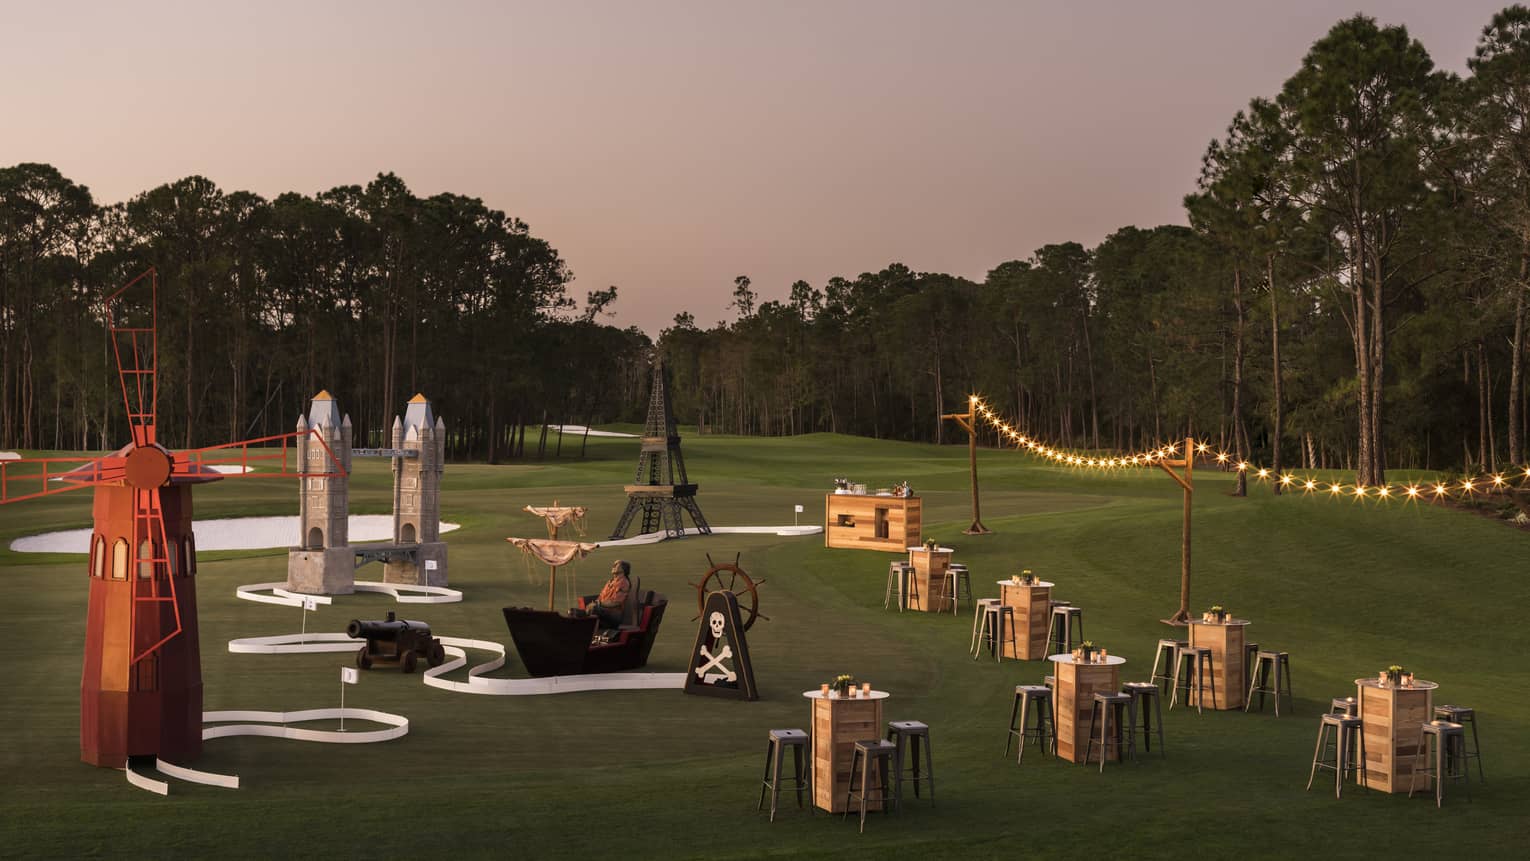 The sun sets over a golf course that's set up with stringed lights and cocktail tables for a putt putt event